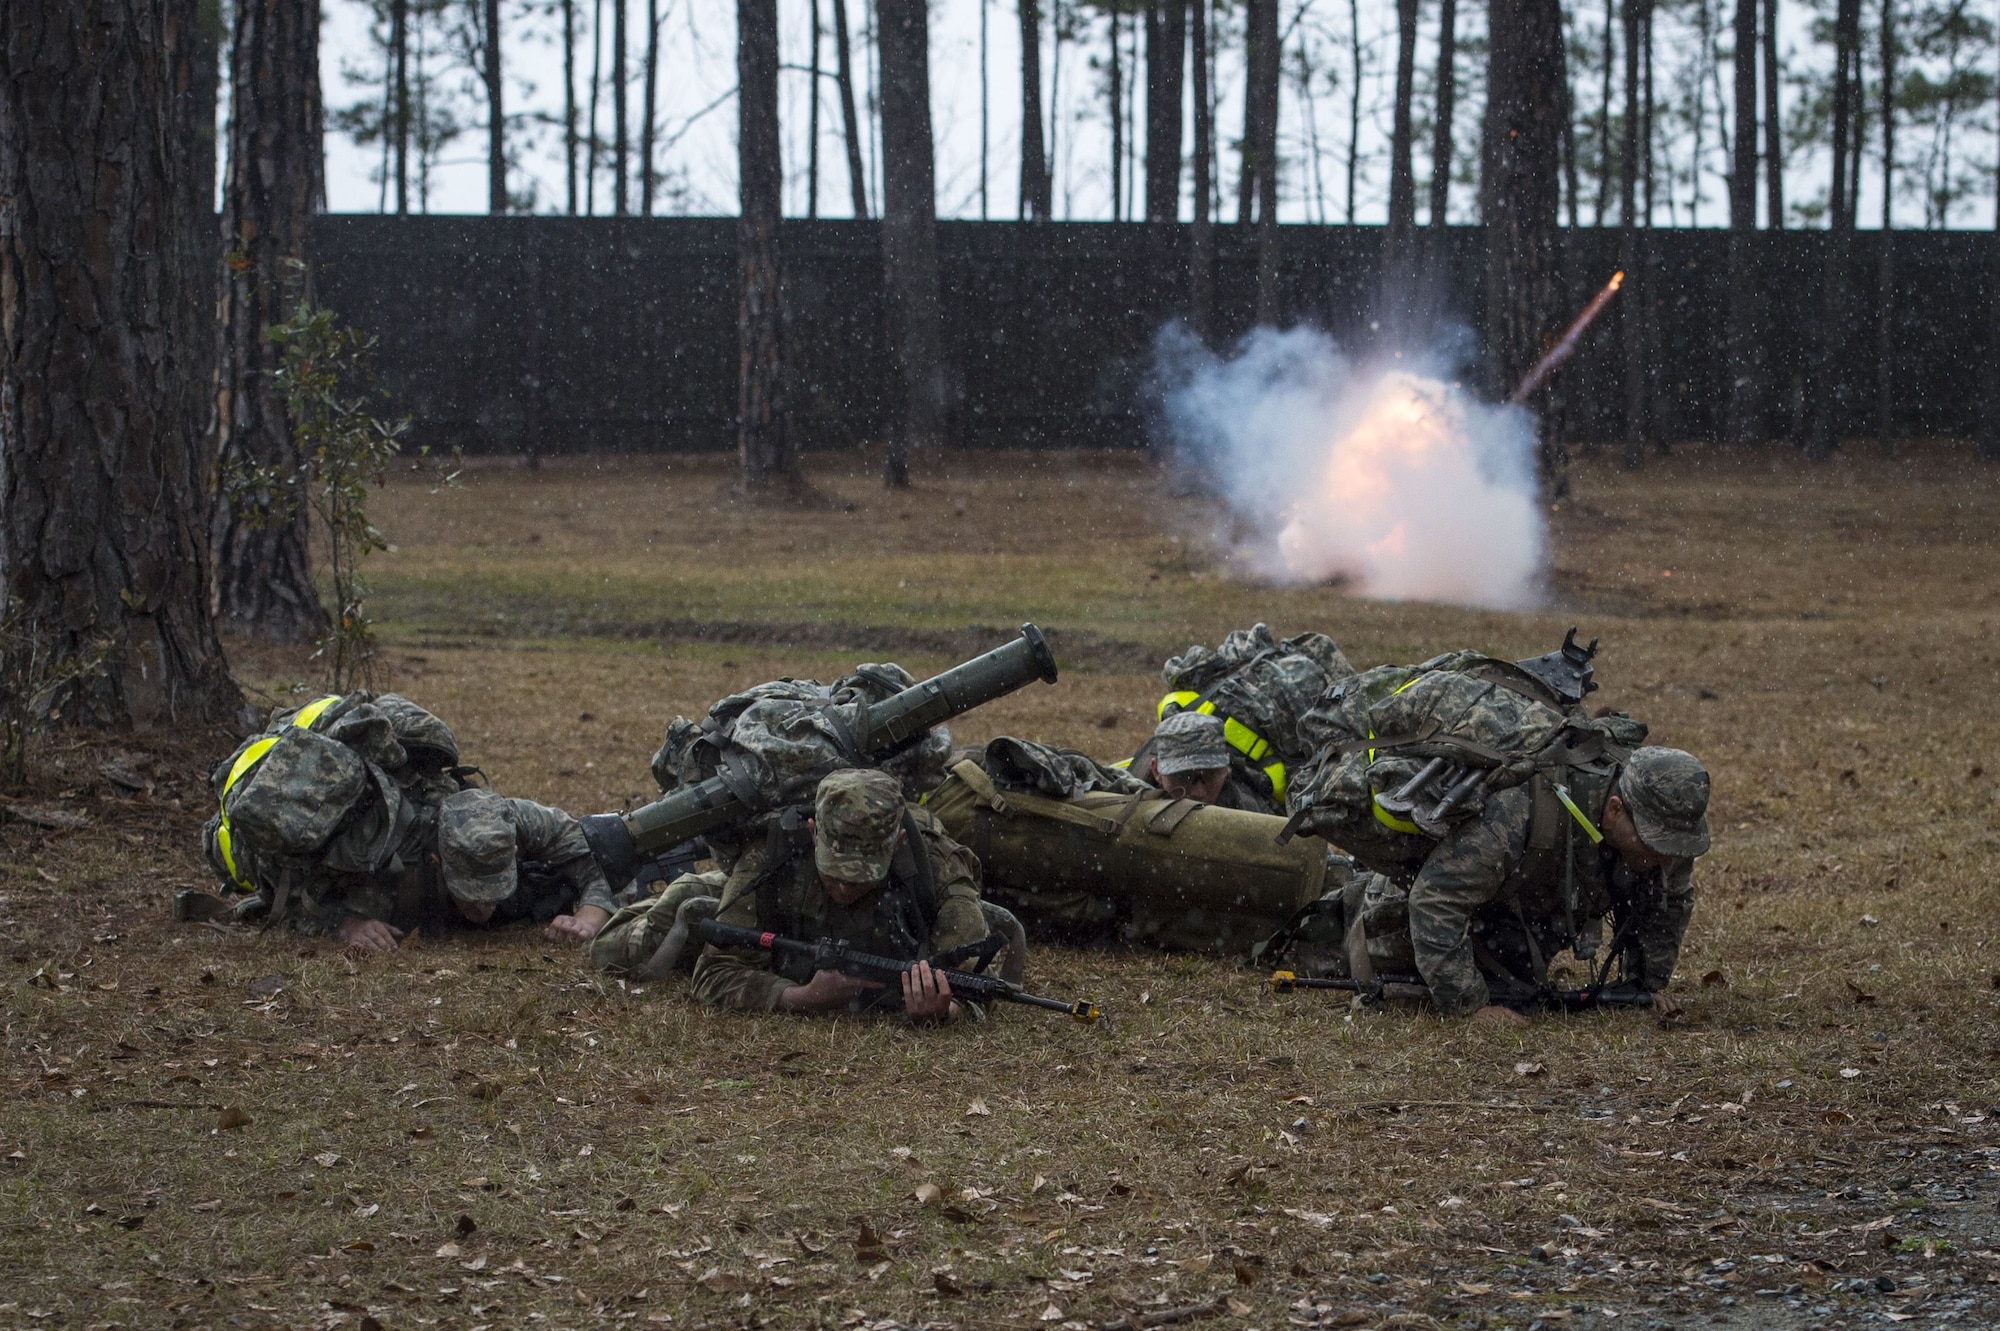 Airmen duck for cover as a non-lethal grenade explodes during a Pre Ranger Assessment Course, Feb. 11, 2018, at Moody Air Force Base, Ga. The three-day assessment is designed to determine whether Airmen are ready to attend the Air Force Ranger Assessment Course held at Fort Bliss Army Post, Texas. Ranger cadre test Airmen’s physical fitness, tactical abilities, land navigation skills, leadership qualities, water confidence and academic ability to determine if they have the knowledge and will to become Rangers. (U.S. Air Force photo by Senior Airman Janiqua P. Robinson)